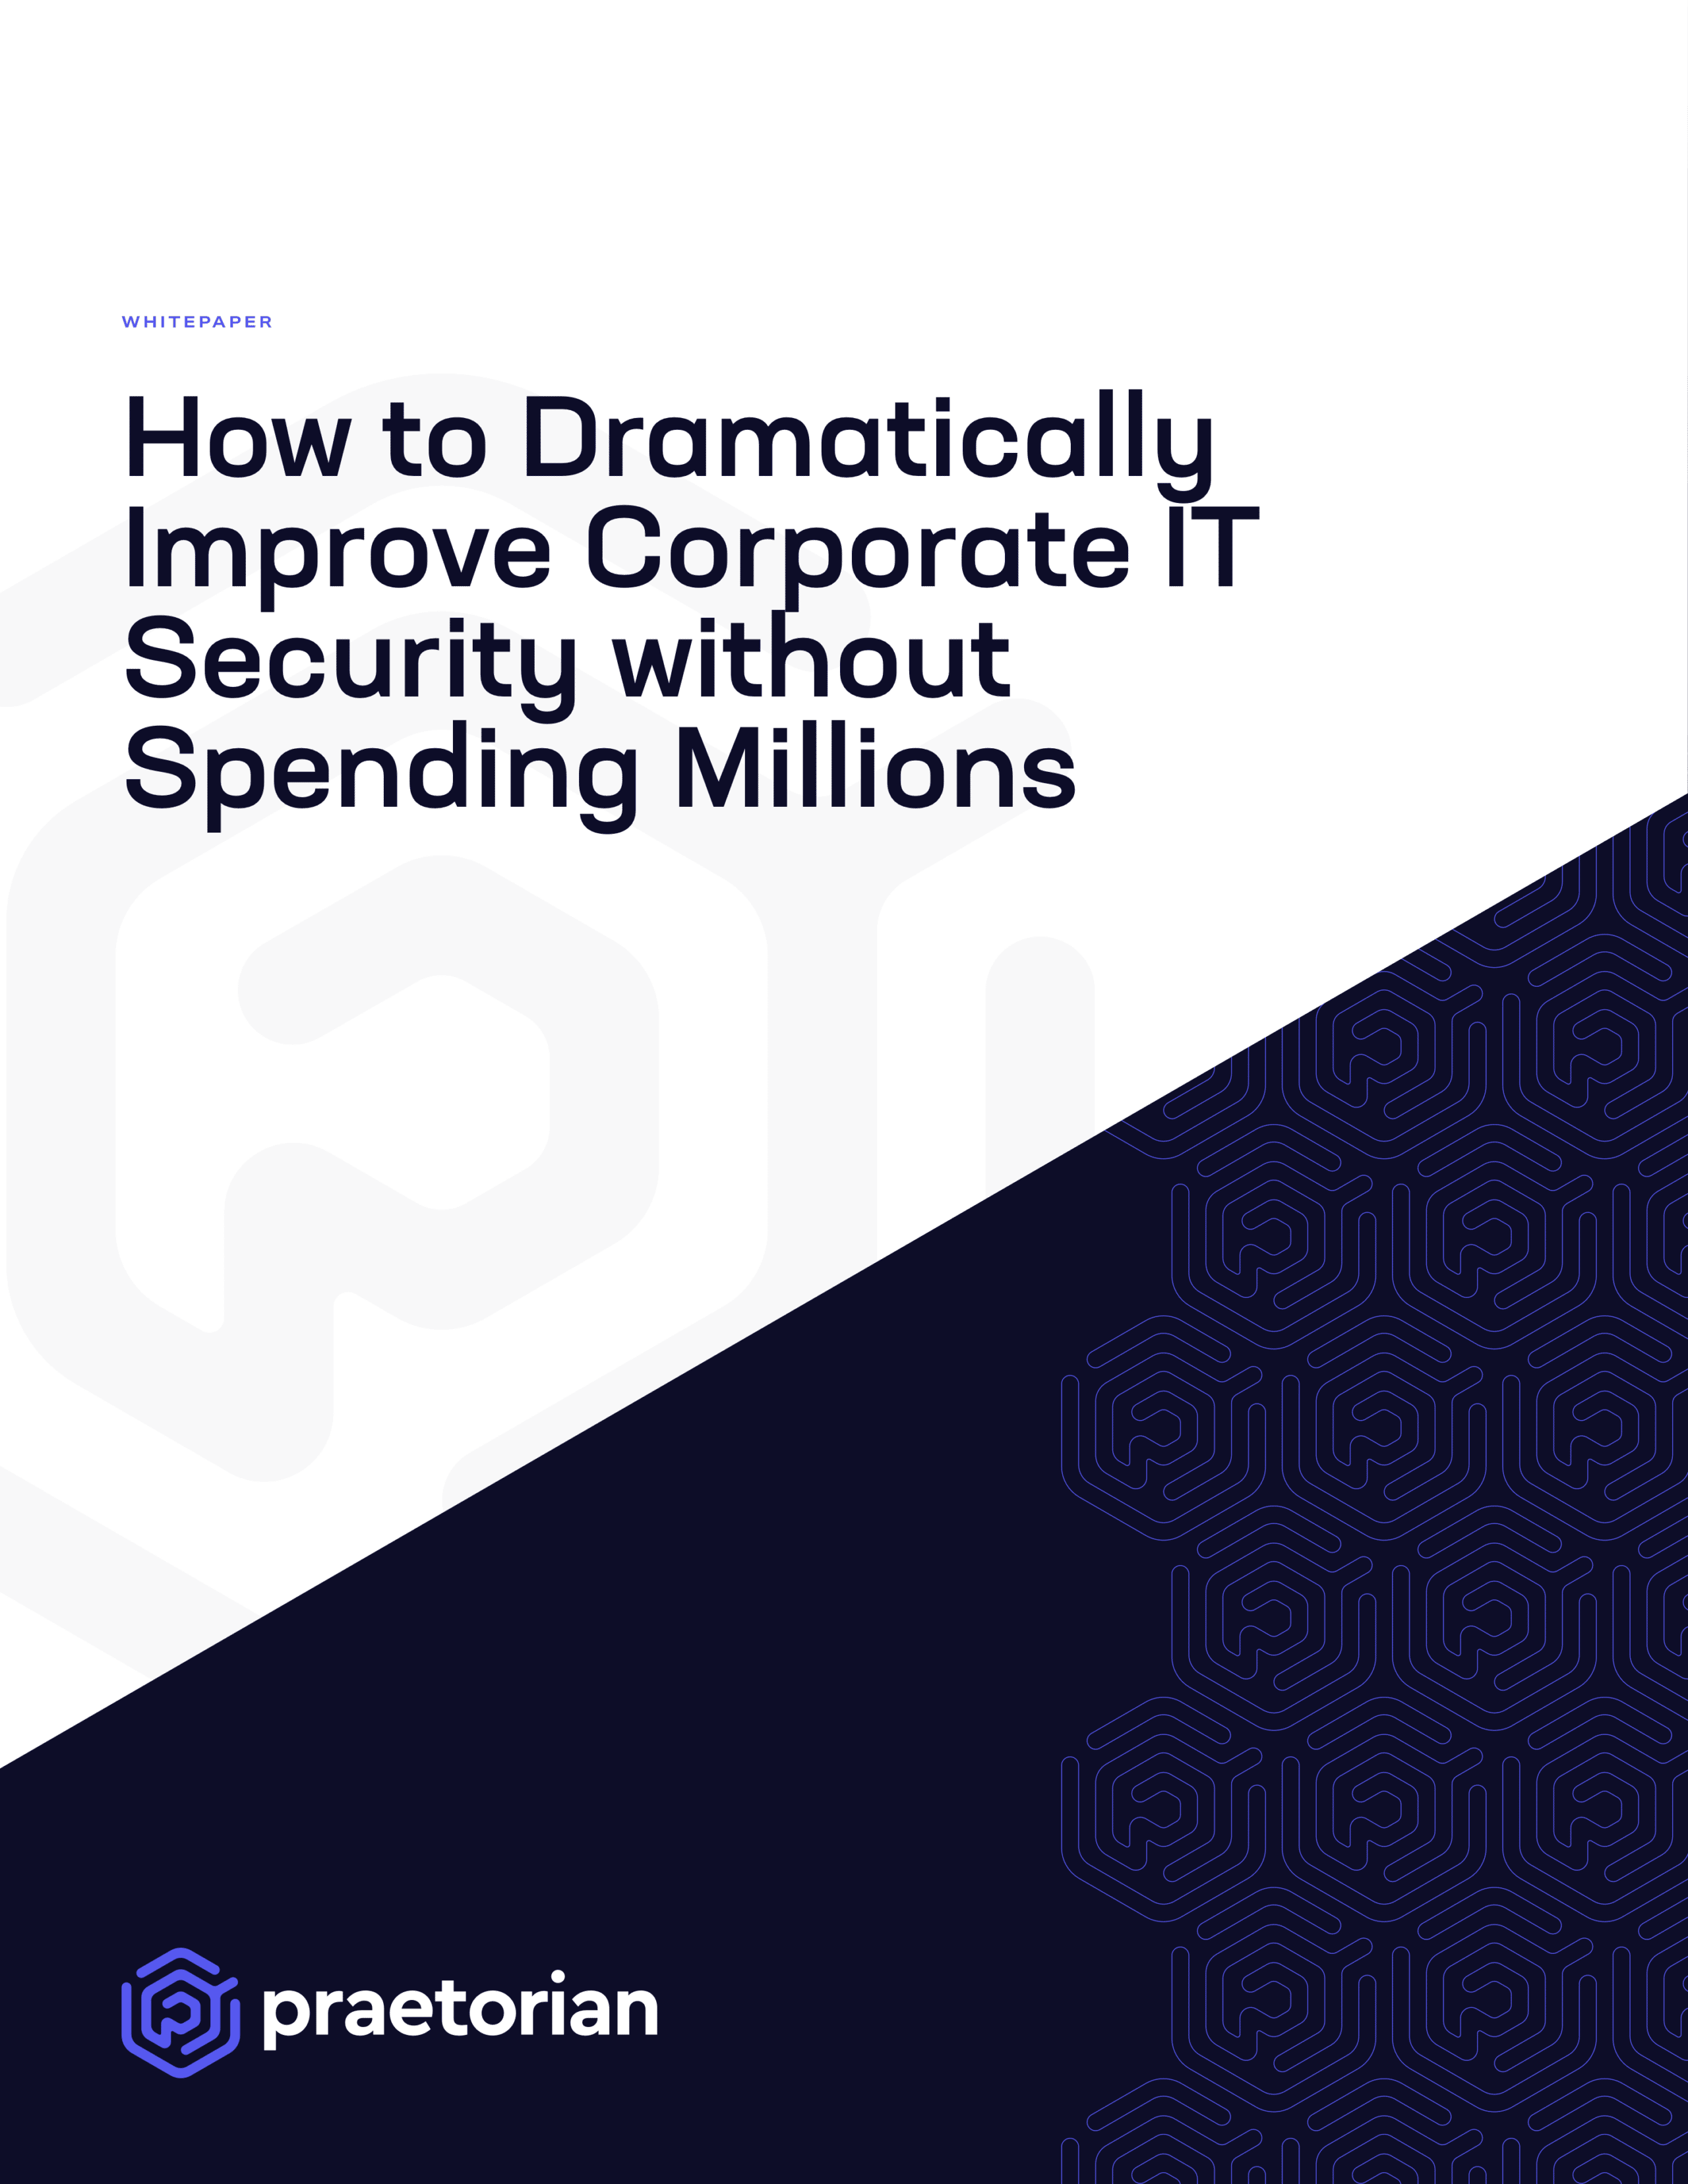 How to Dramatically Improve Corporate IT Security without Spending Millions